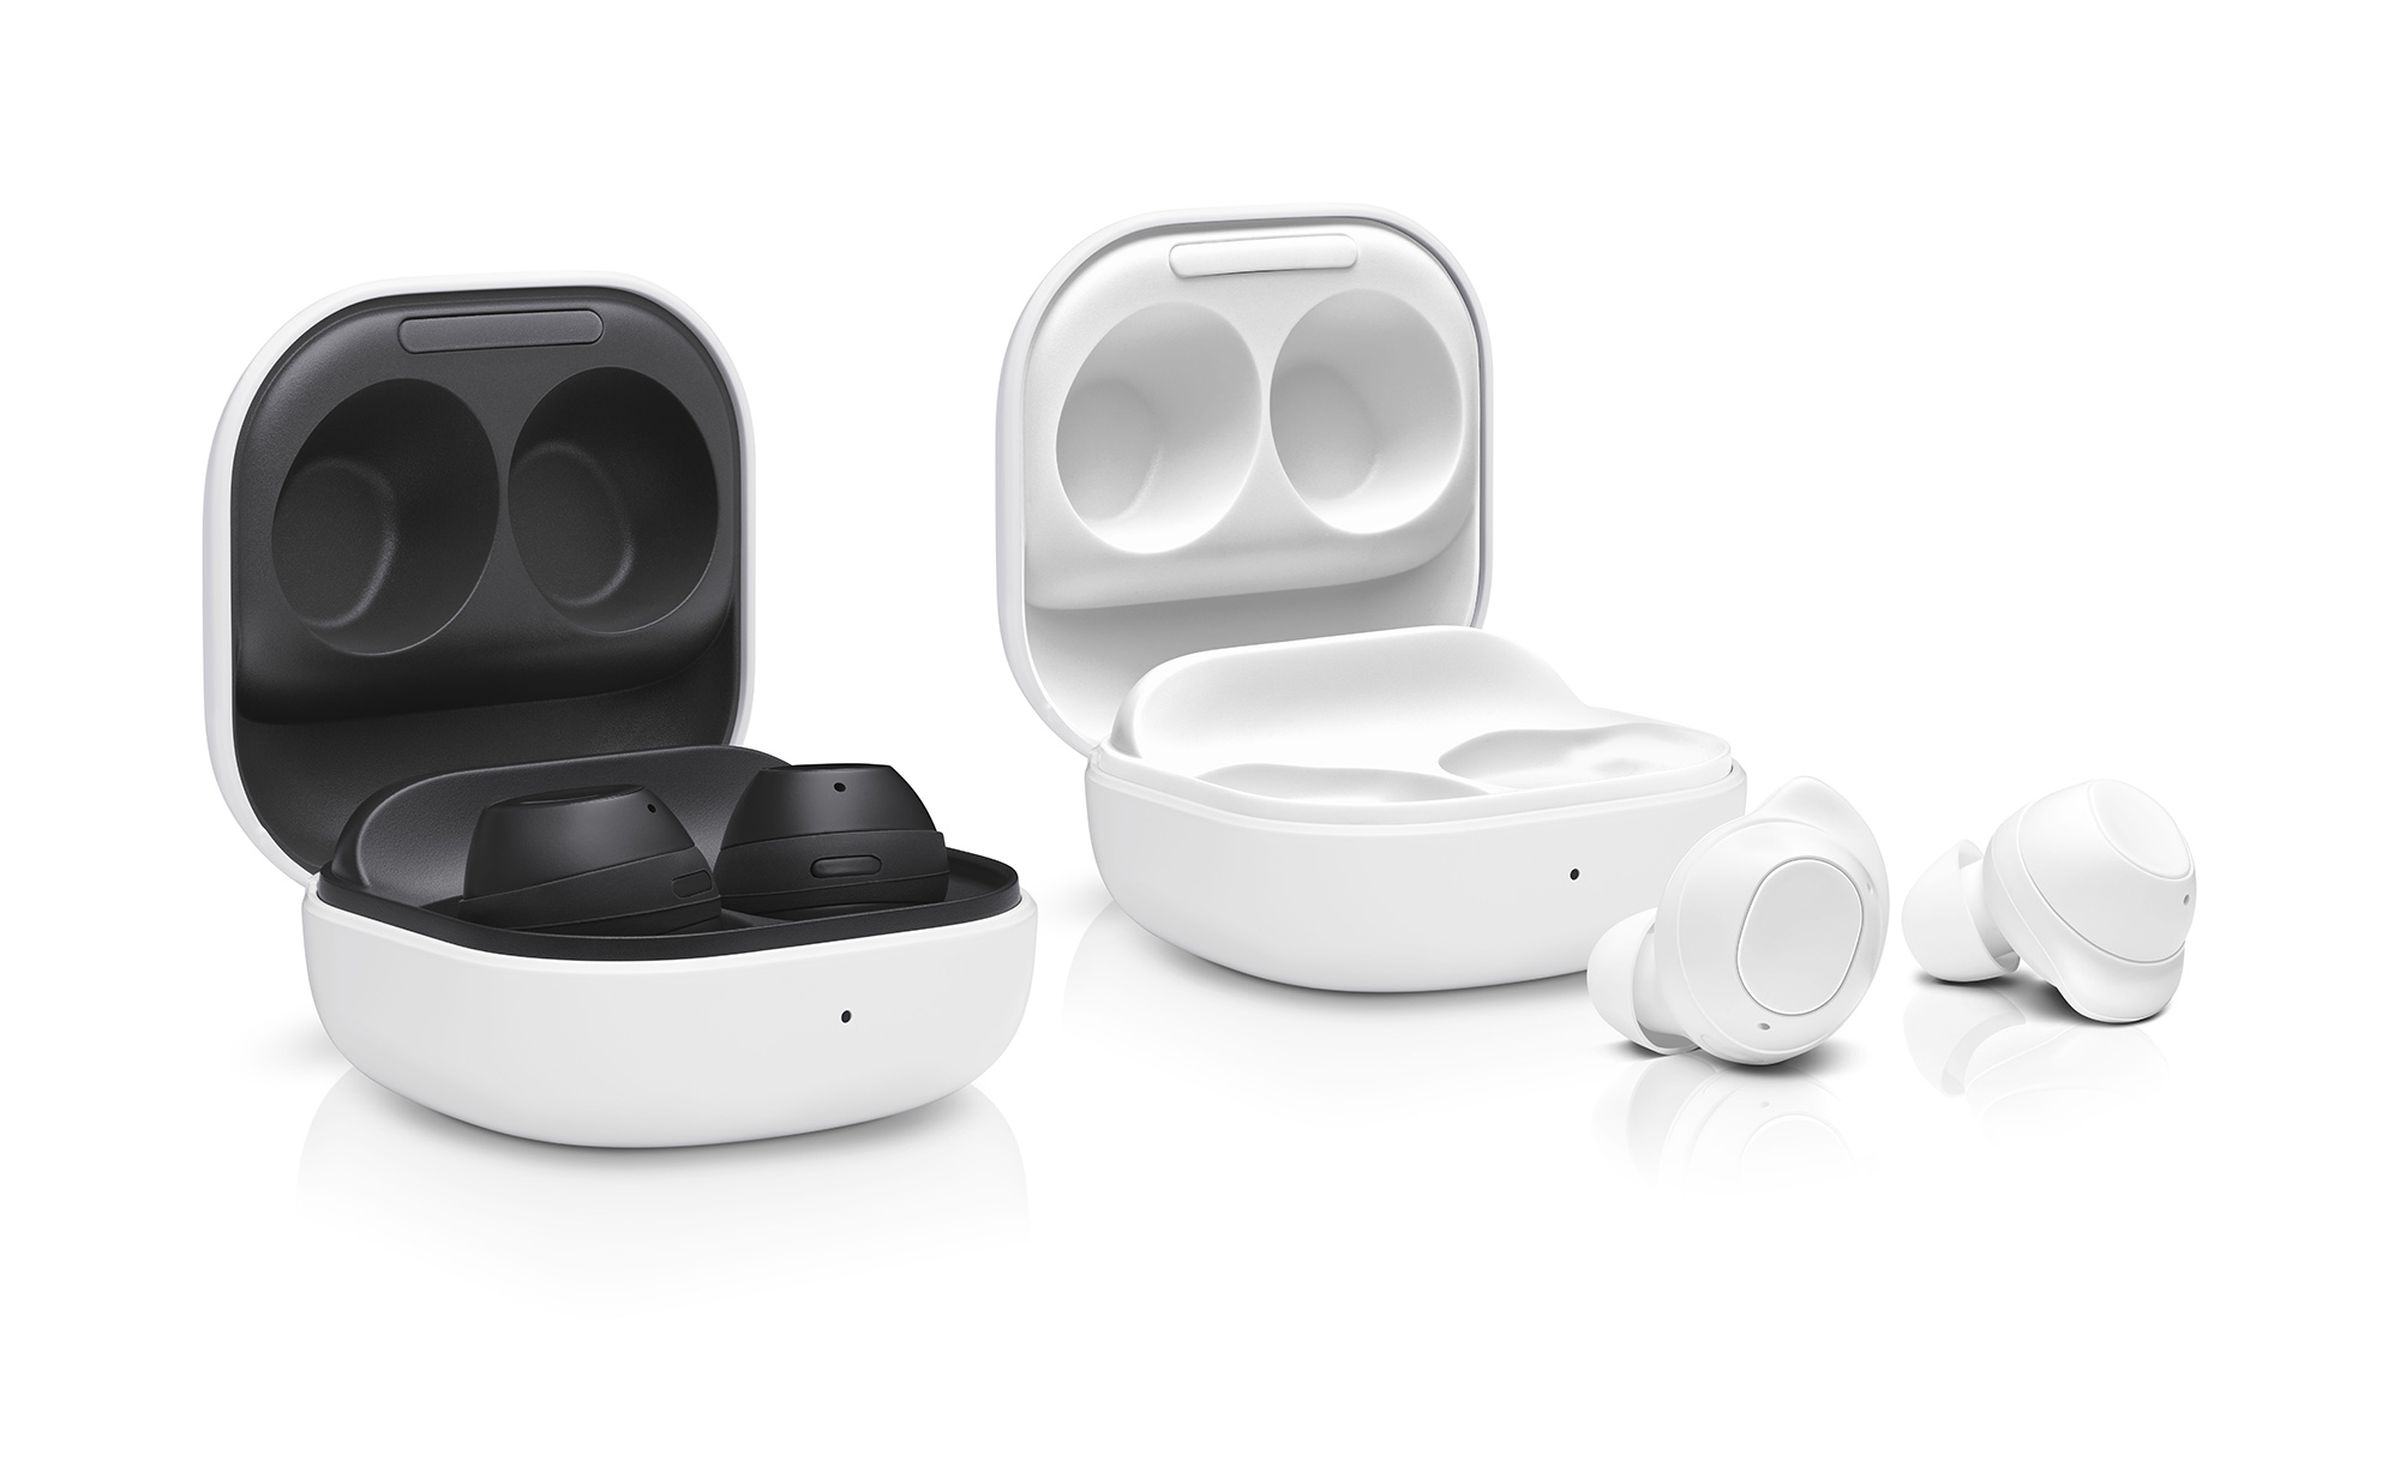 Samsung Galaxy Buds FE in black and white.